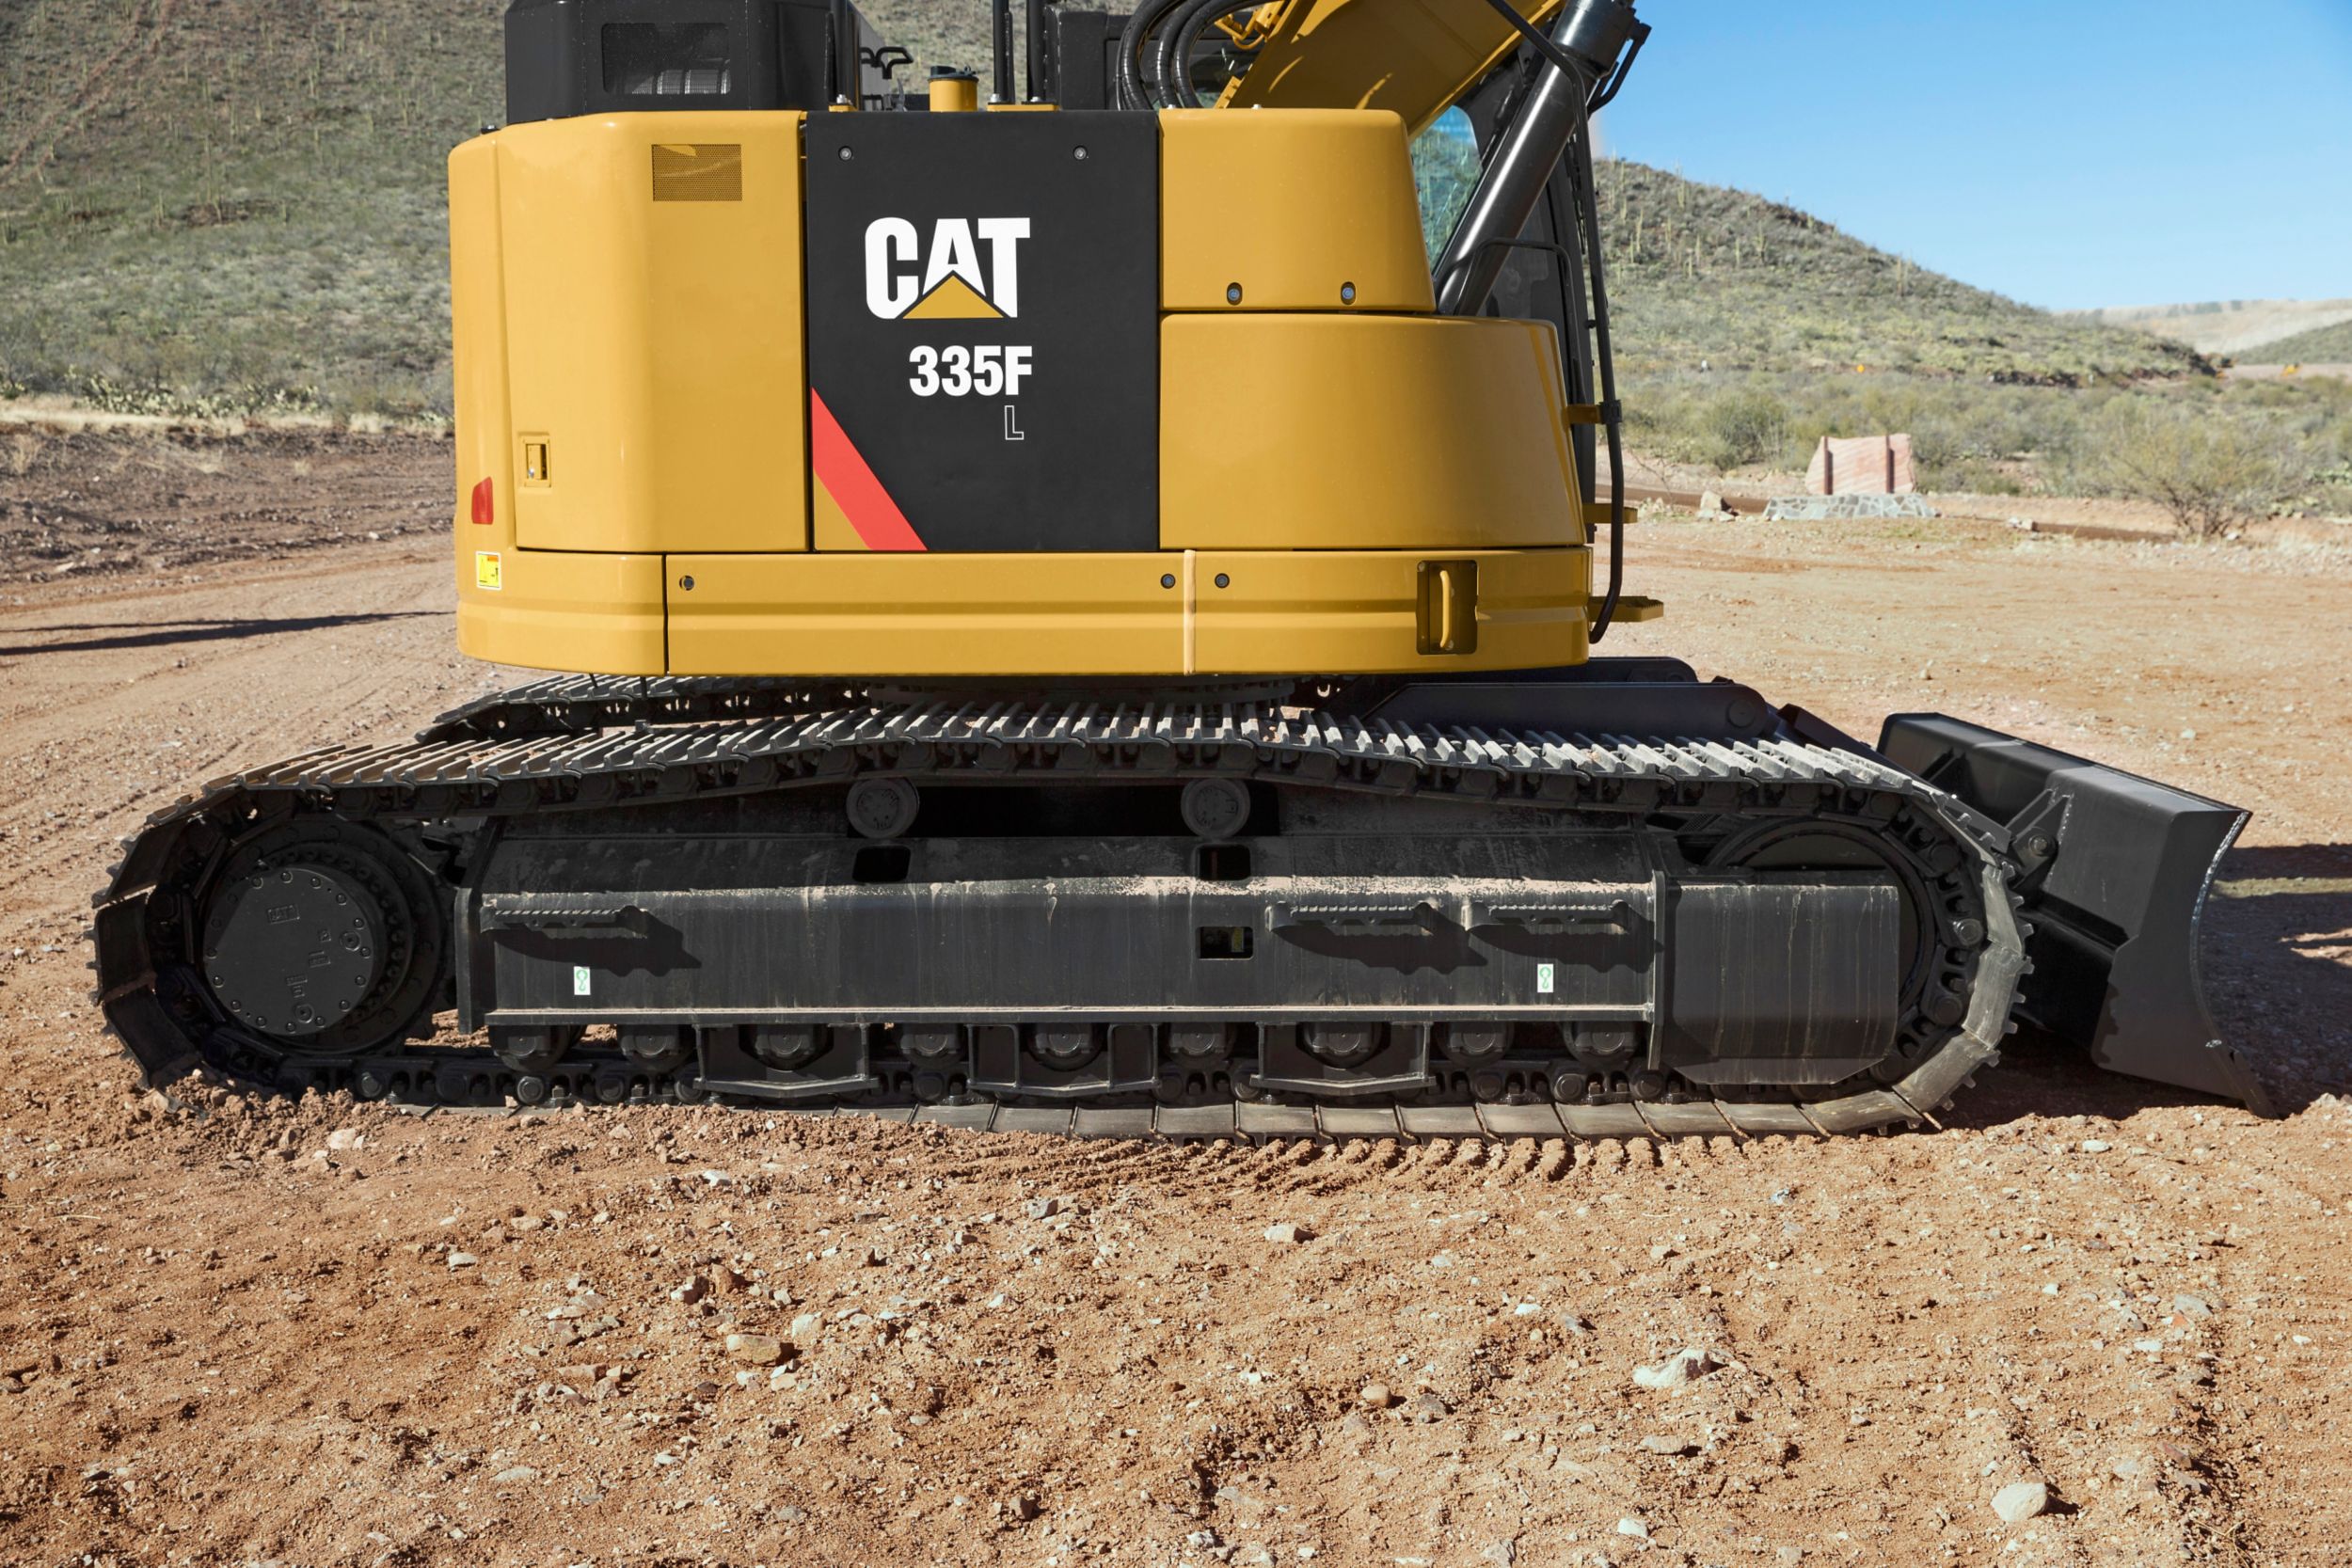 Pin By Vaupel On Bagger In 2020 Cat Excavator Construction Equipment Cats